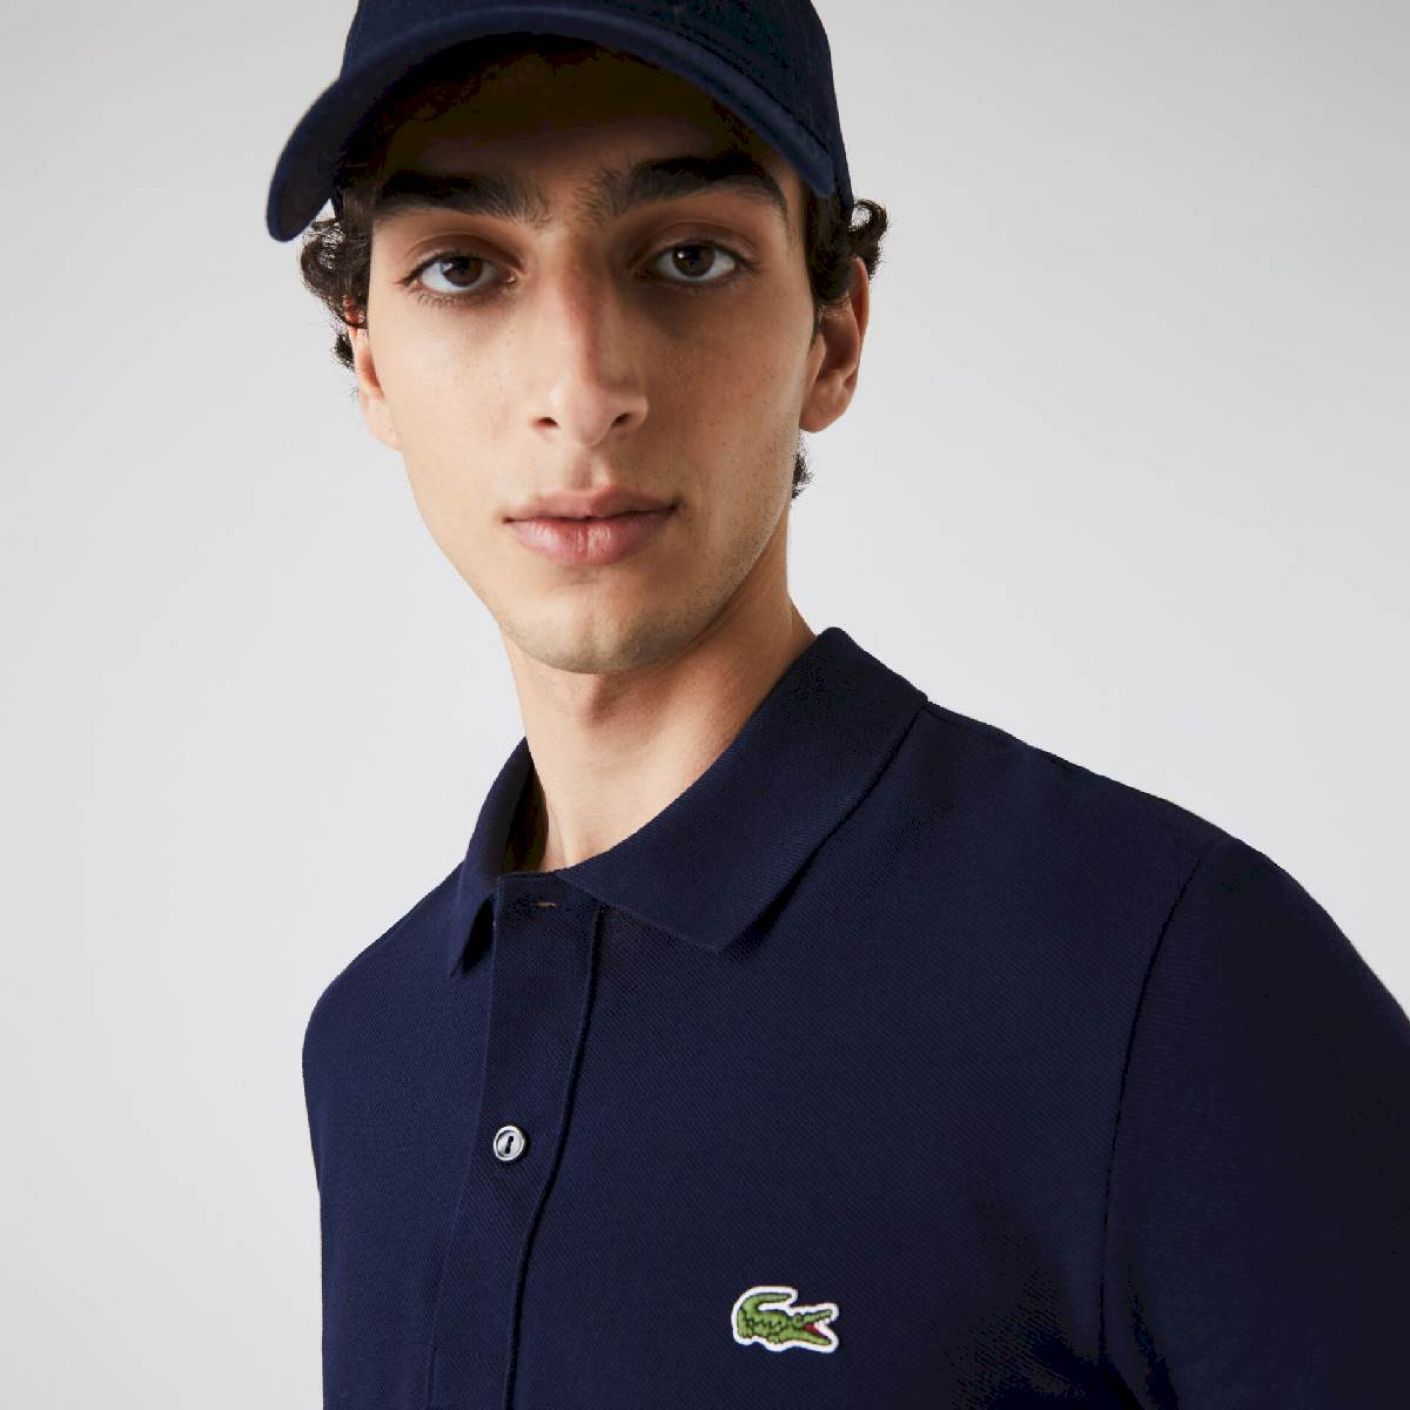 Lacoste Polo Slim Fit Navy Blue